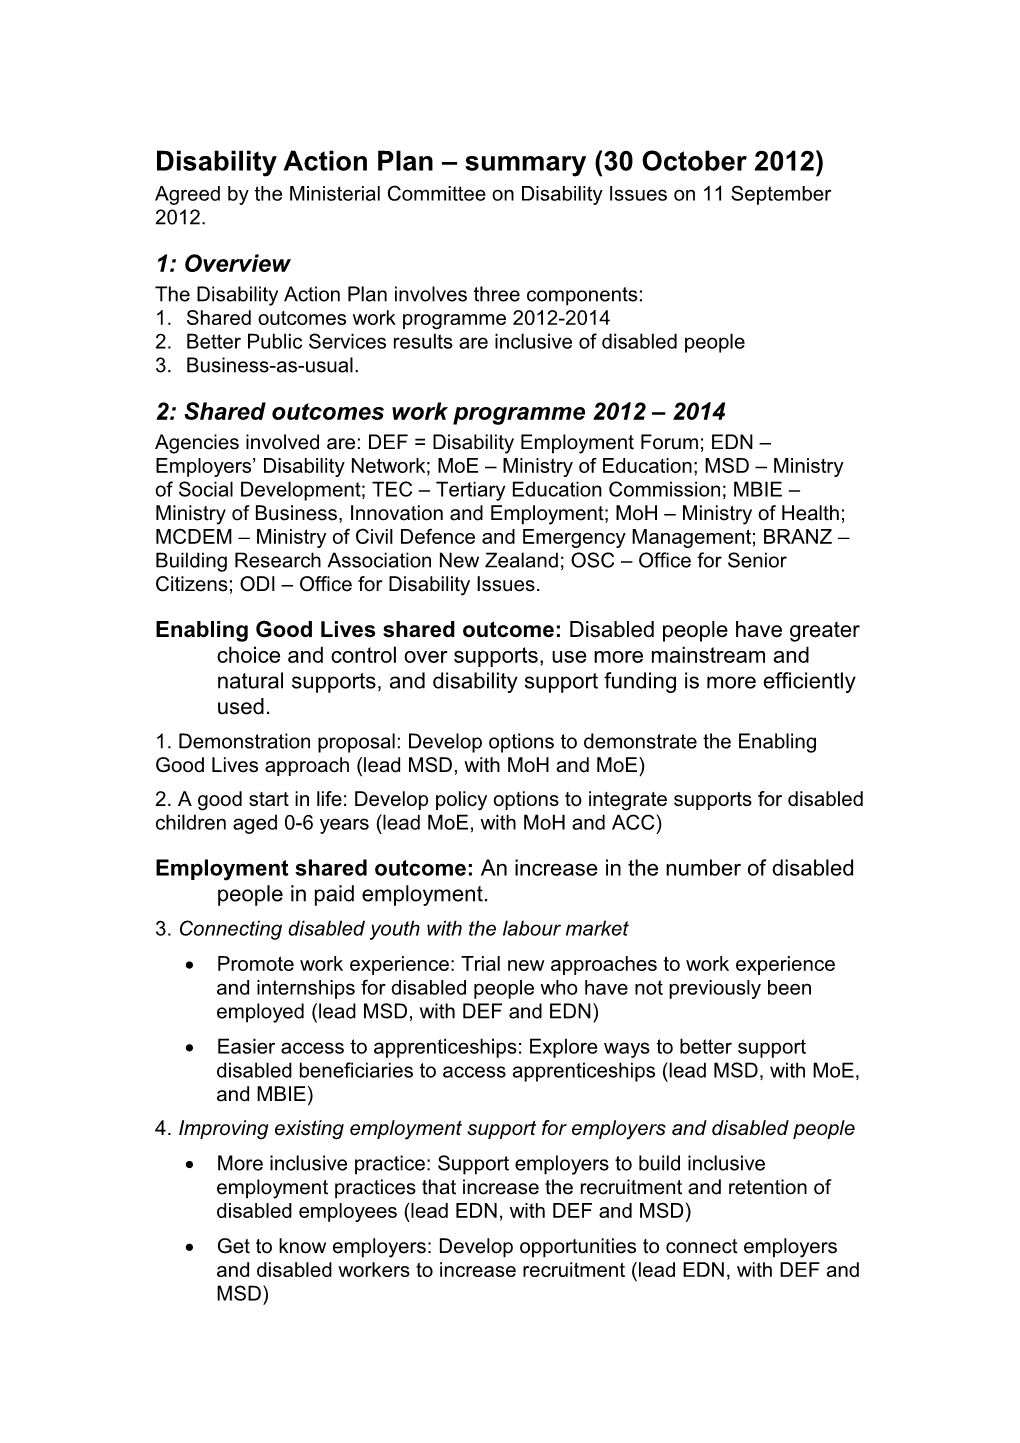 Disability Action Plan Update 2012